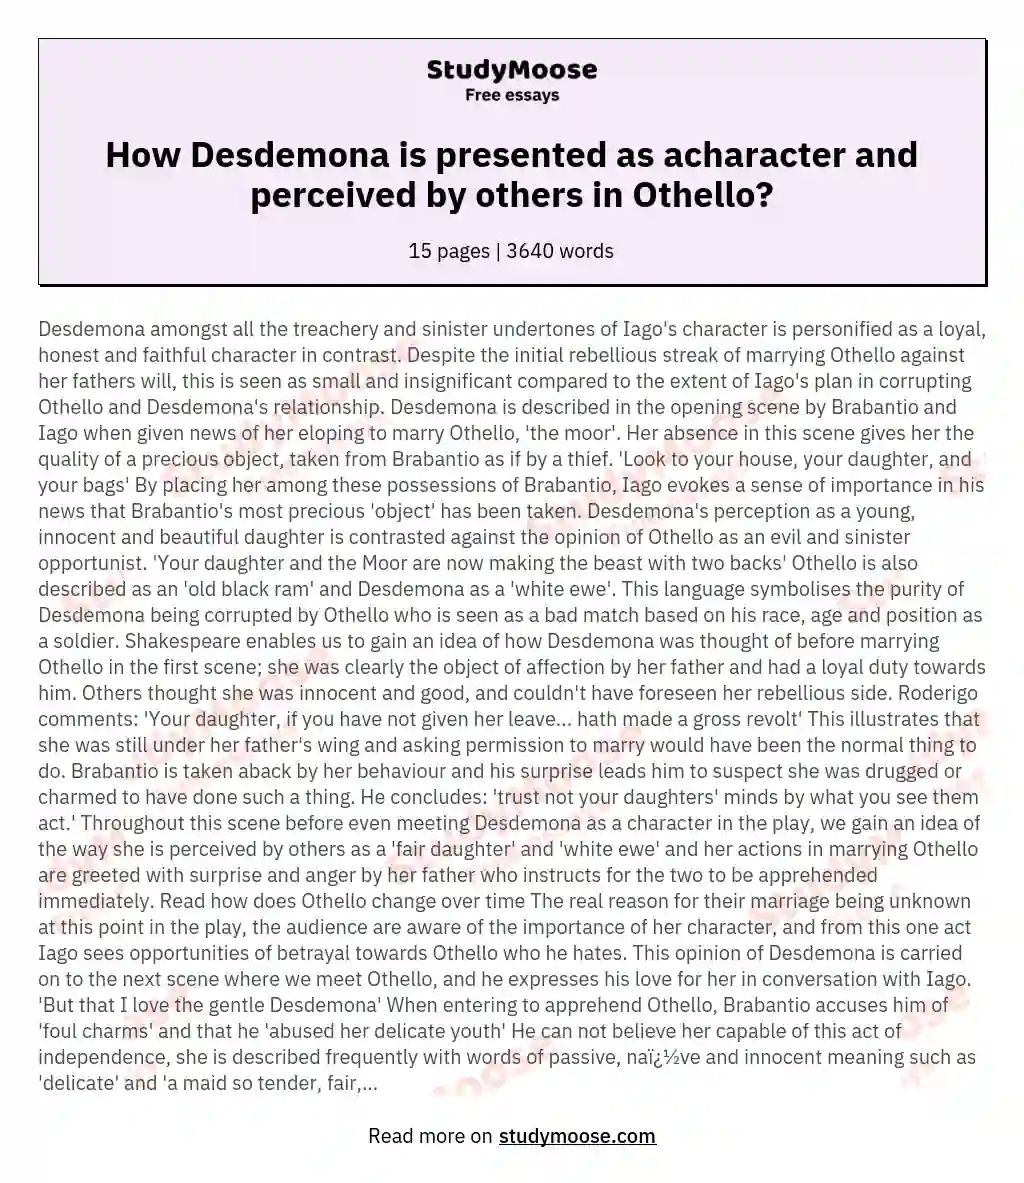 How Desdemona is presented as acharacter and perceived by others in Othello?